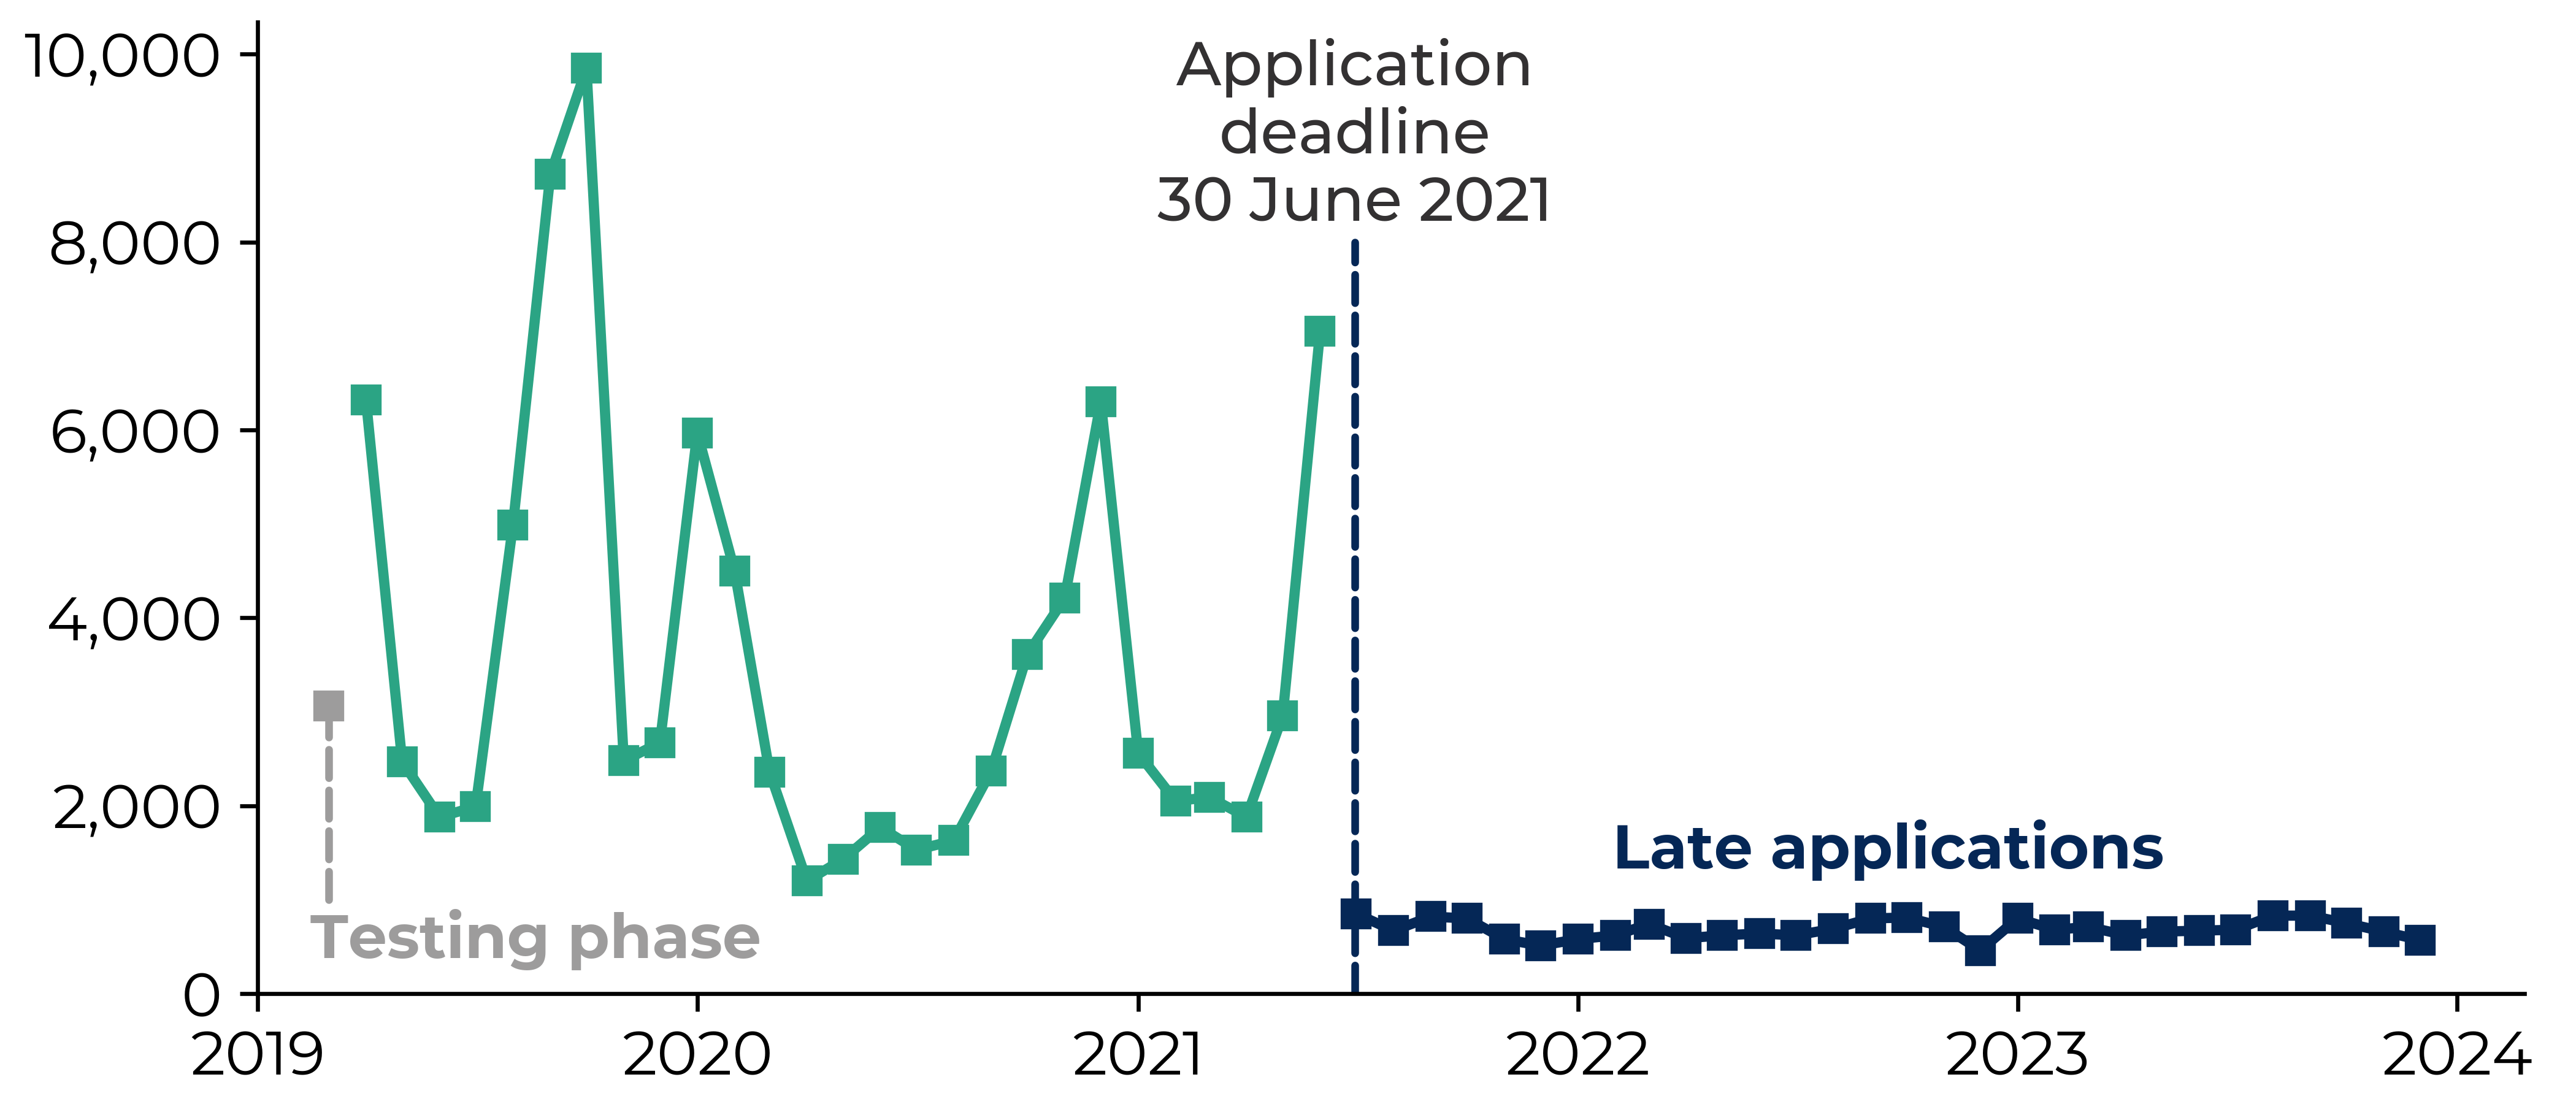 Graph showing the number of applications to the EUSS from Wales by month since the scheme opened in March 2019 until 31 December 2023. The number of applications varied between 450 and 10000 and was at its highest (9850) in October 2019. Other peaks around 6000 to 7000 monthly applications occurred in April 2019, January 2020, December 2020 and June 2021. Late applications beyond the 30 June 2021 deadline were less than 1000 per month. 